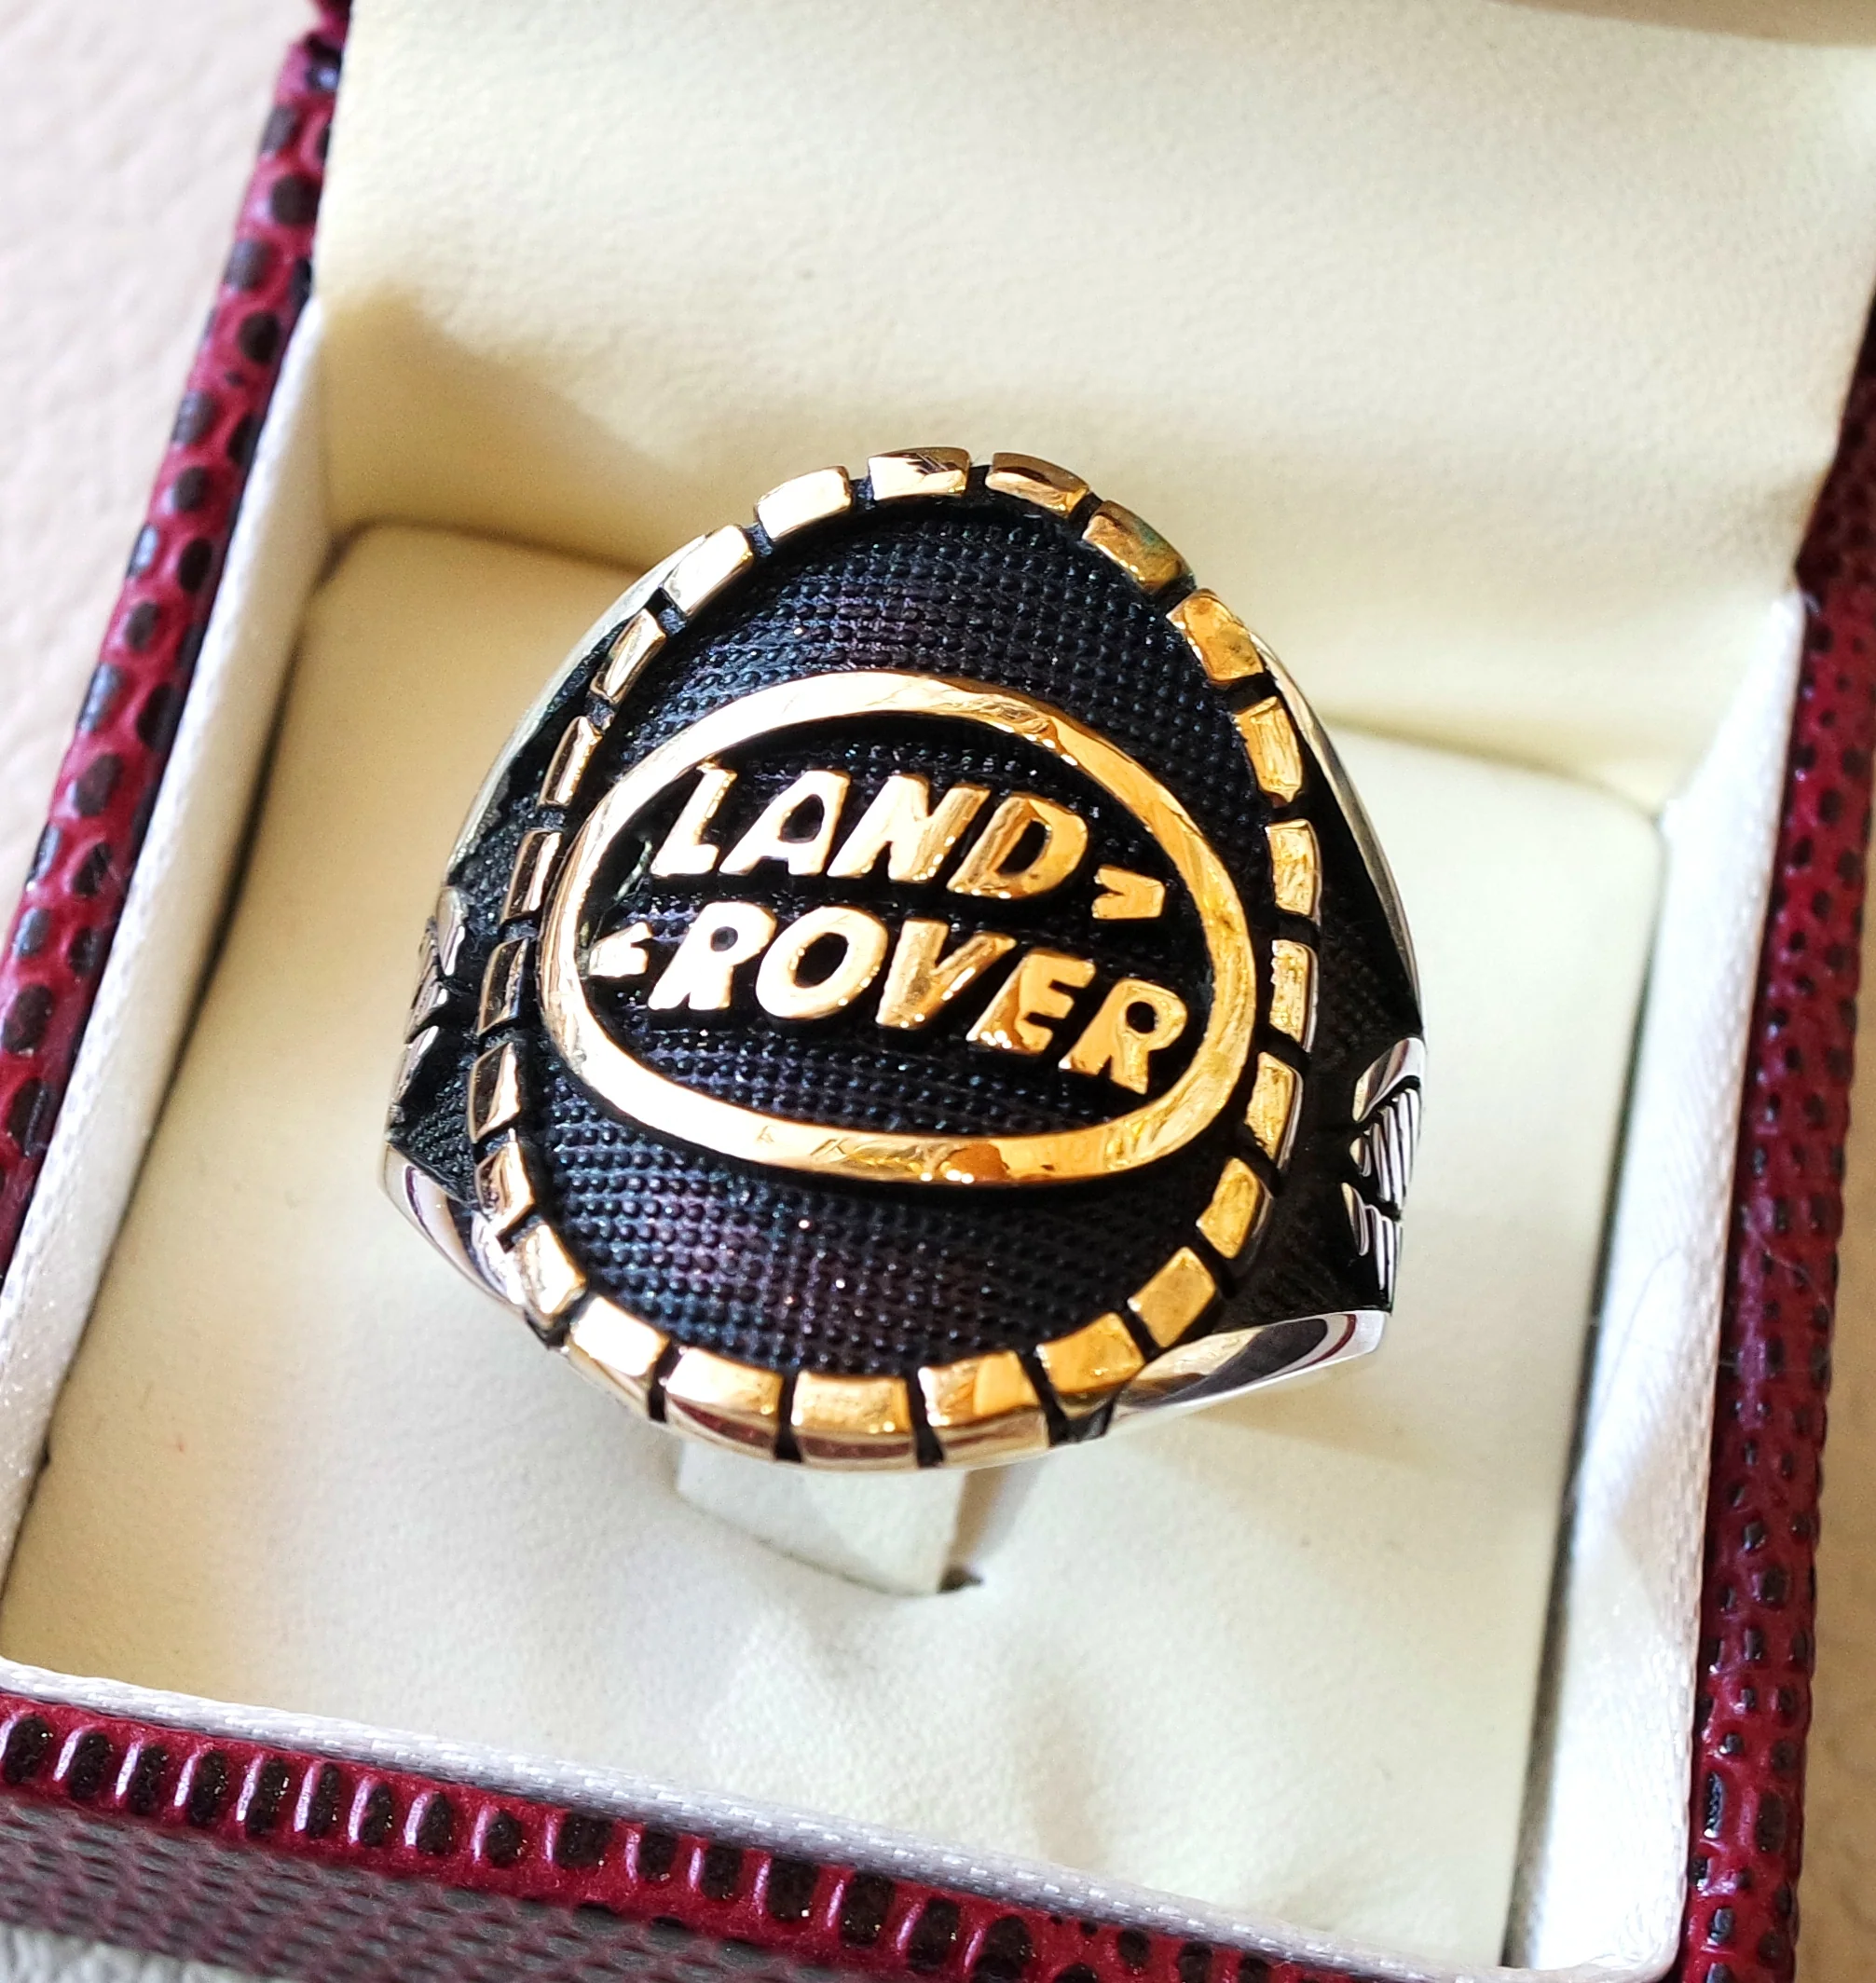 Land Rover sterling silver 925 and bronze heavy man ring new car